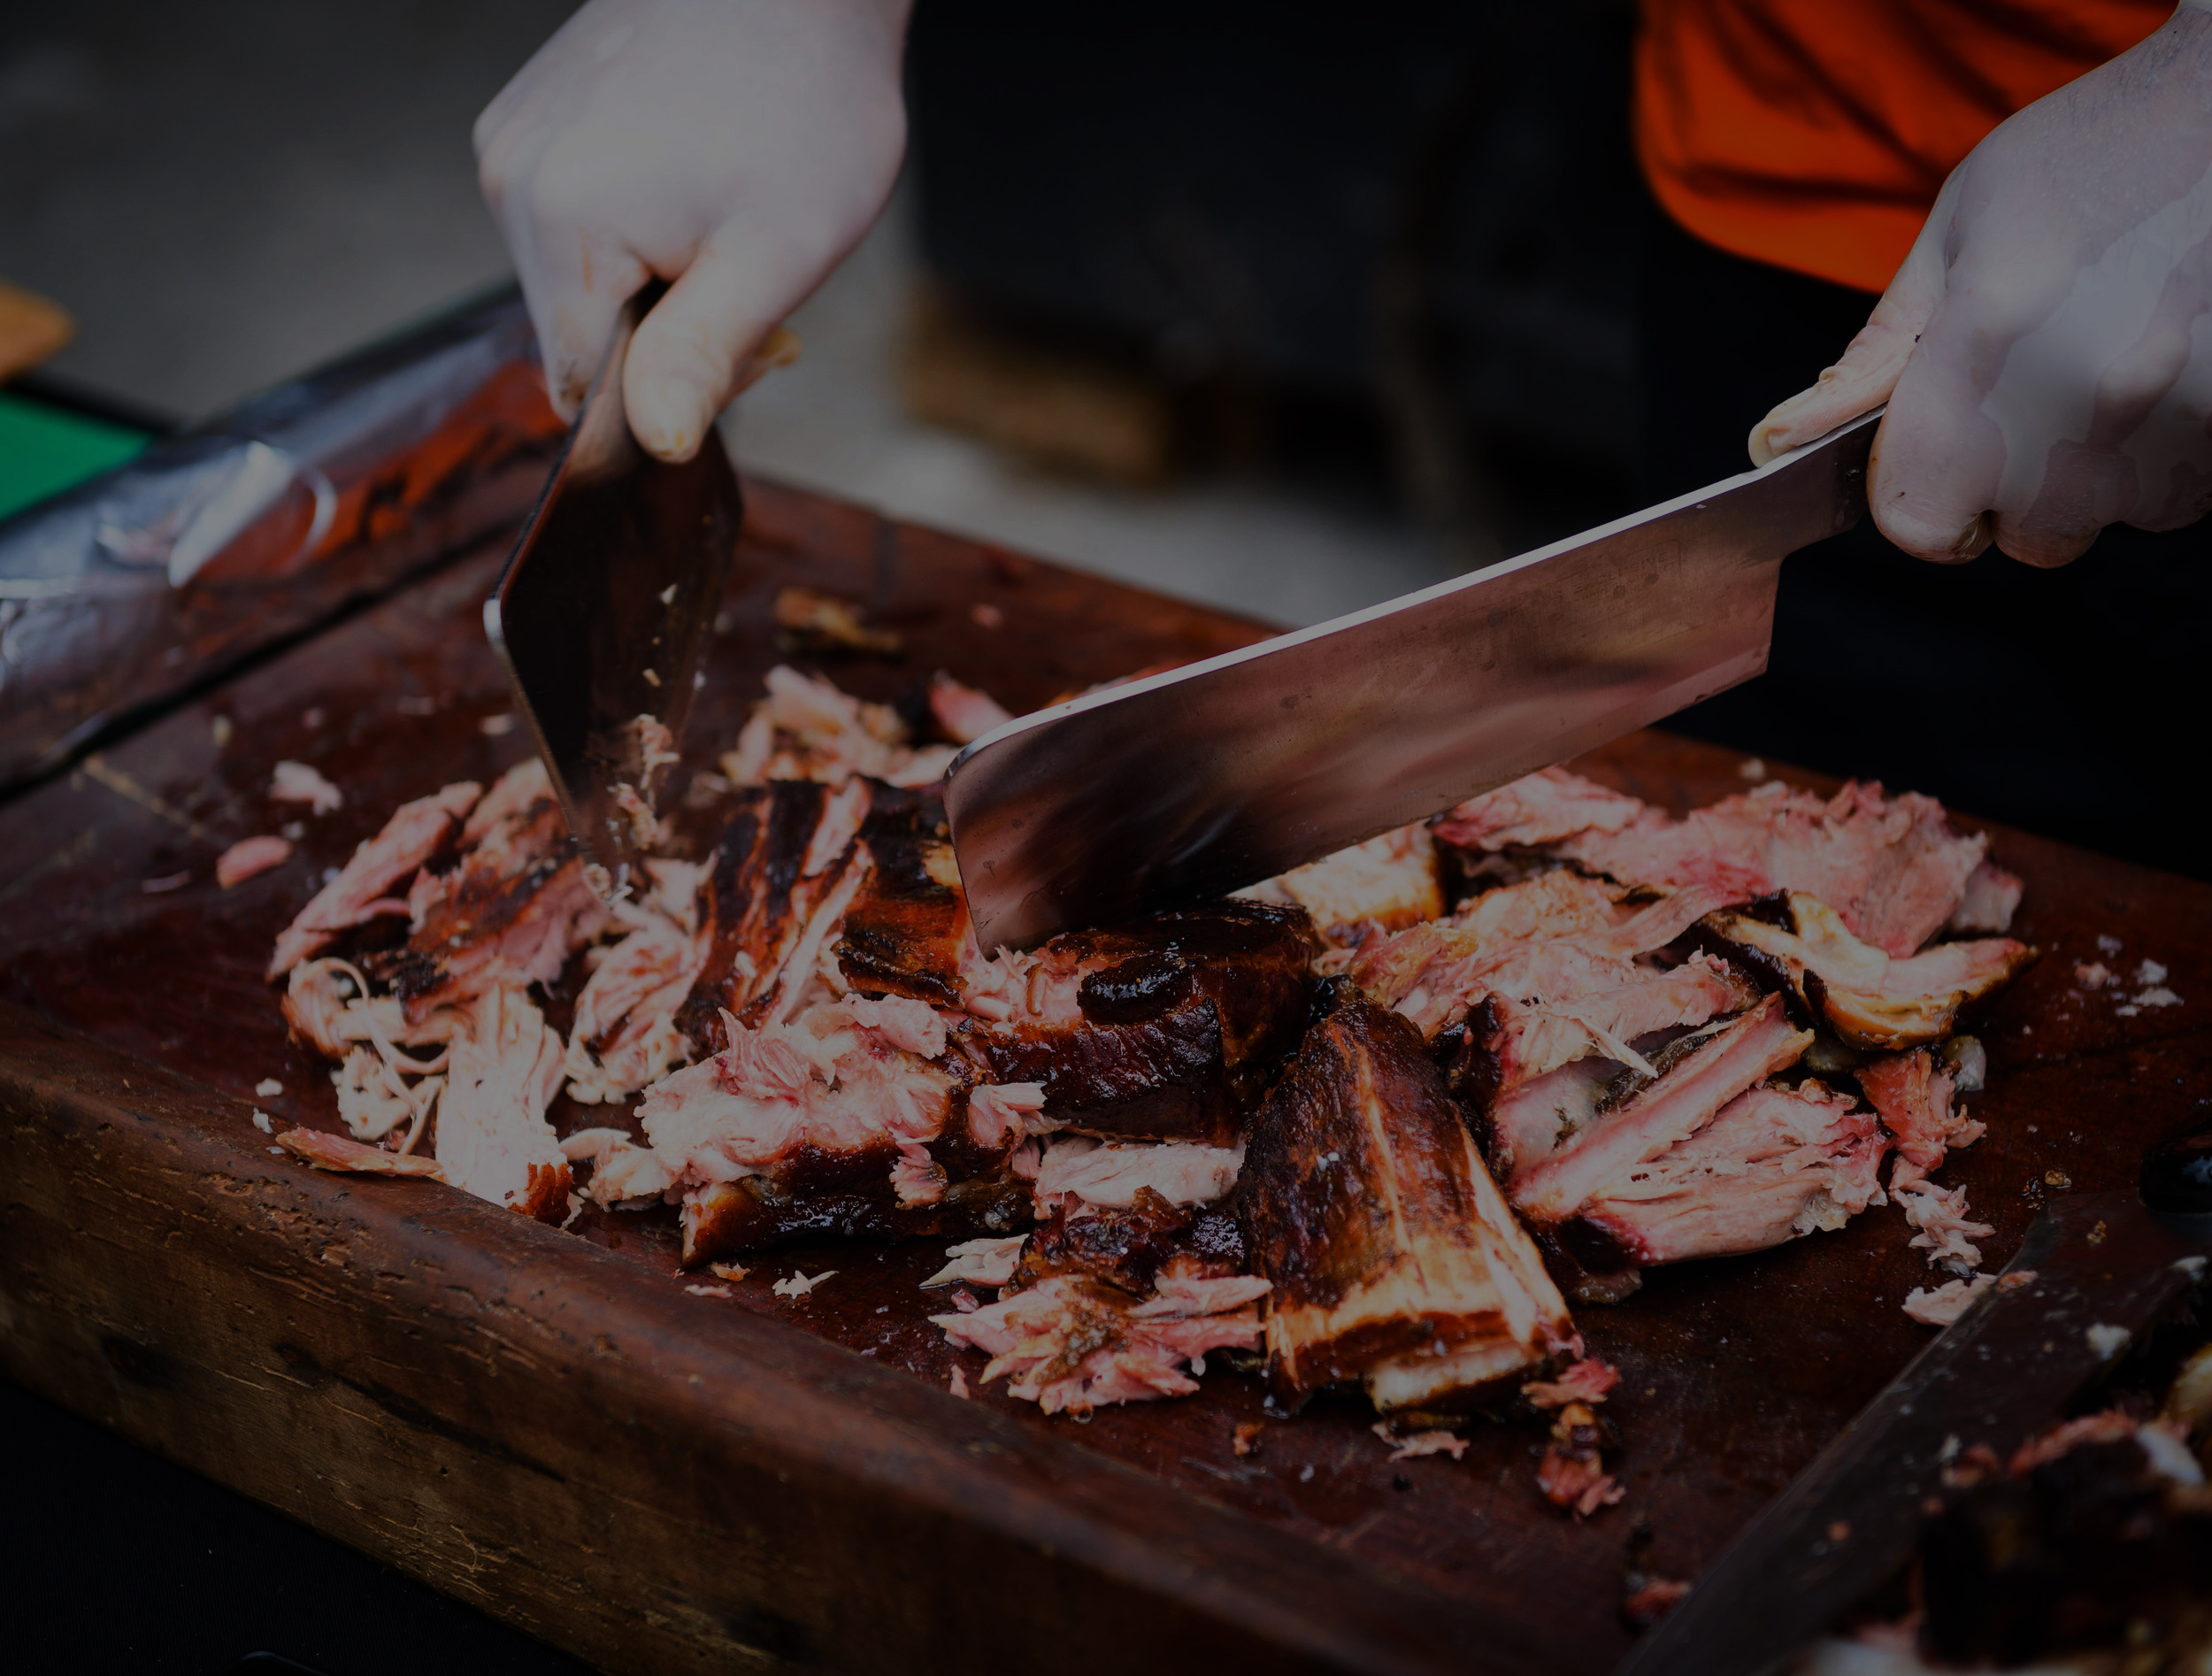 Chef Hands cutting Grilled spare beef or pork back ribs prepared in smoker with a hatchet. Delicious roasted cuts of meet made on barbecue smoker on a wooden cutting desk.